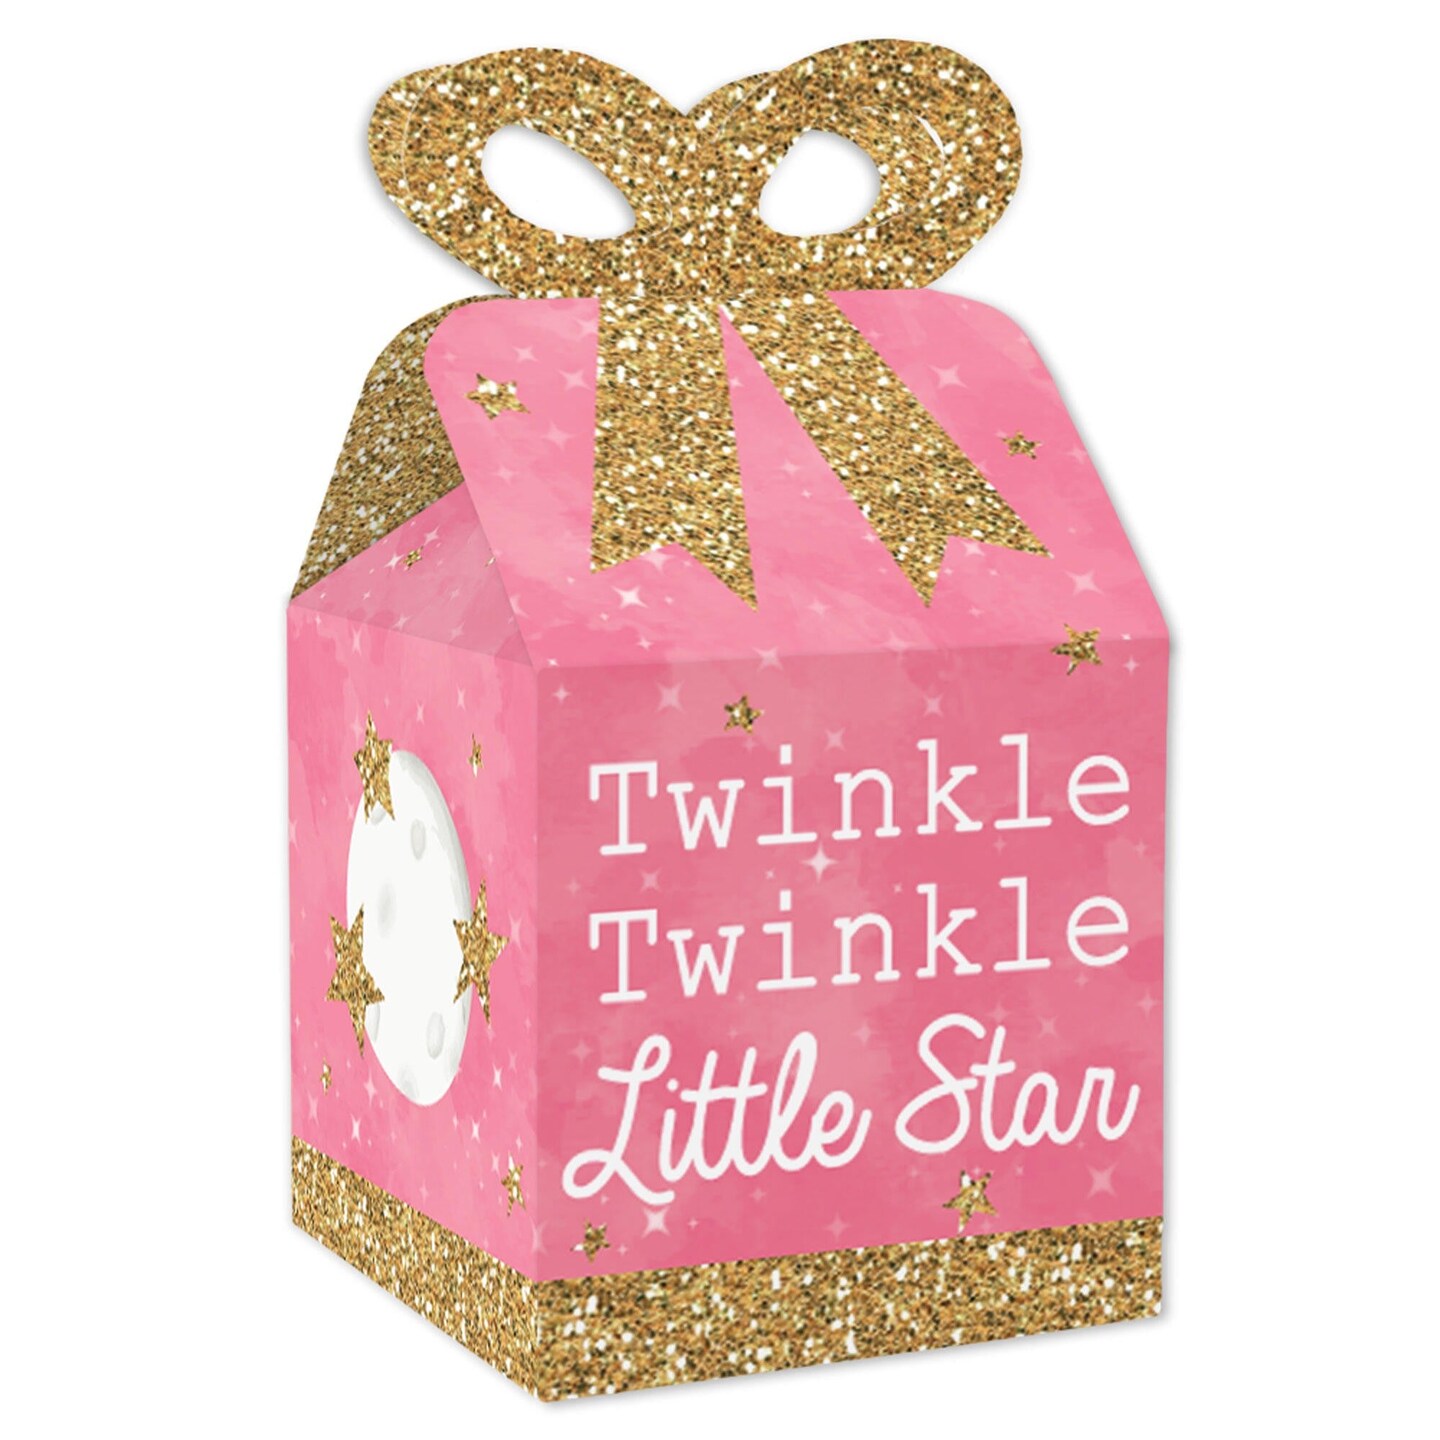 Big Dot of Happiness Pink Twinkle Twinkle Little Star - Square Favor Gift Boxes - Baby Shower or Birthday Party Bow Boxes - Set of 12